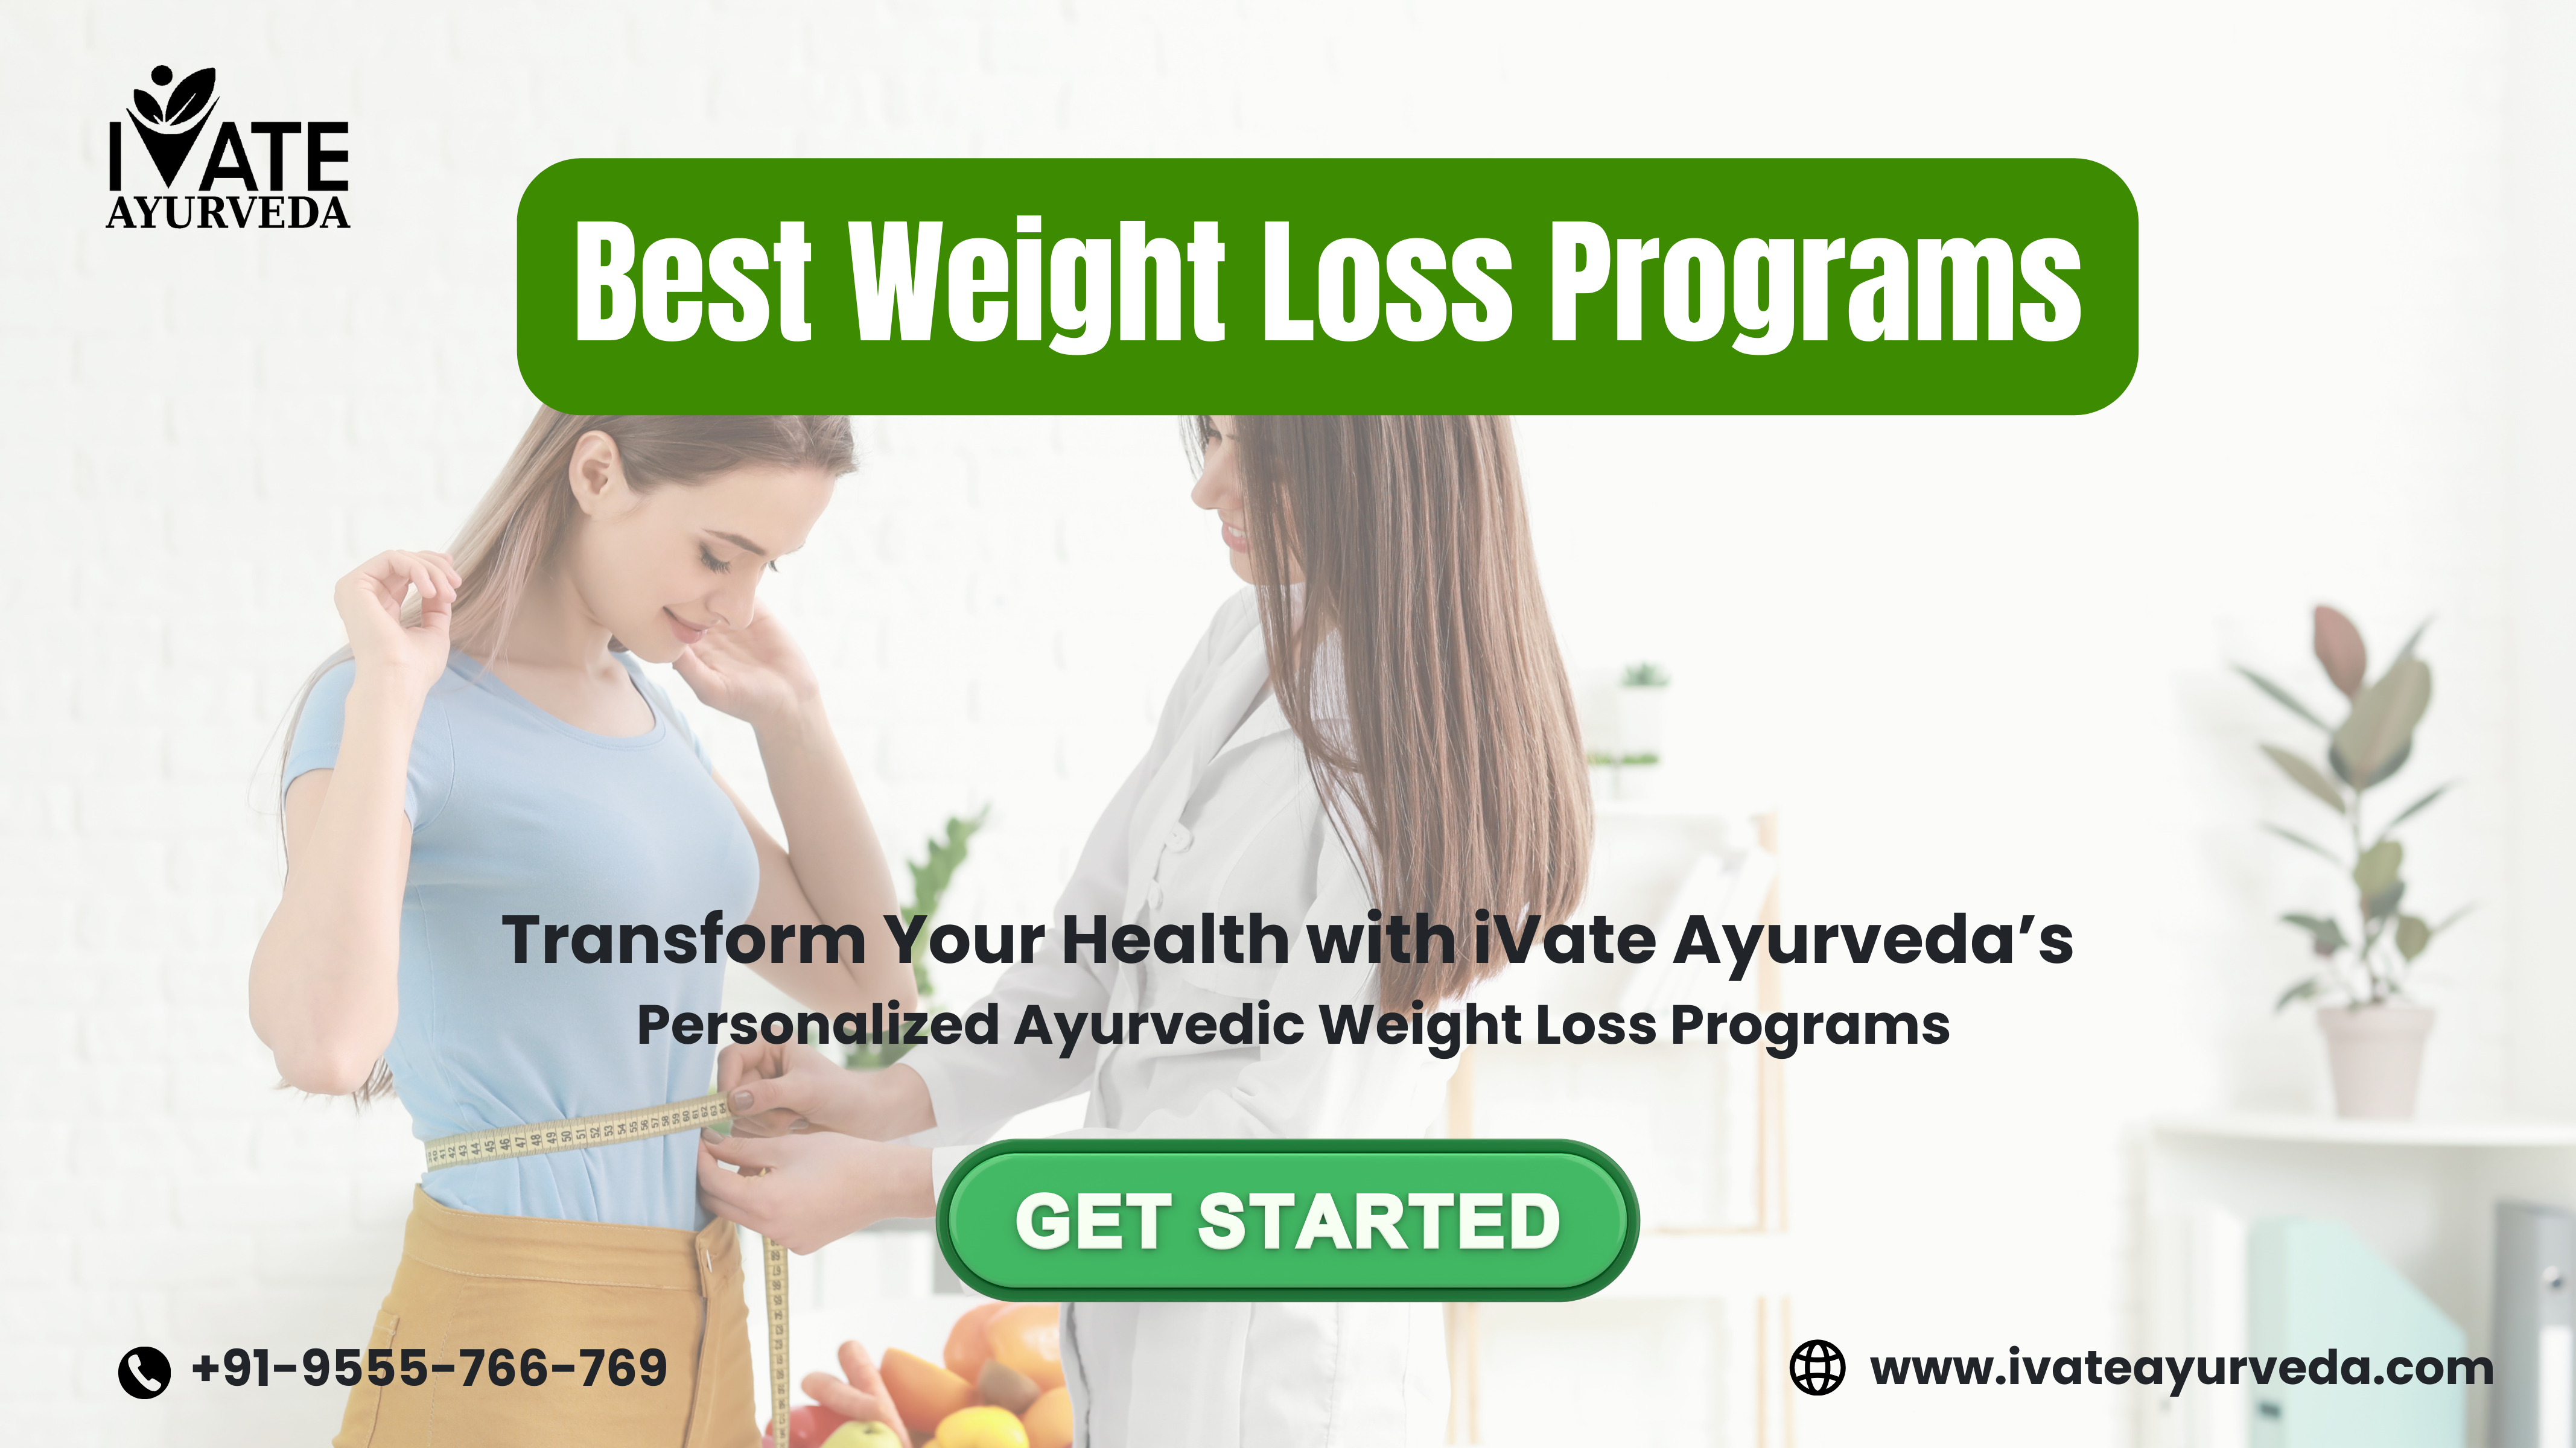 Best Weight Loss Programs: iVate Ayurveda